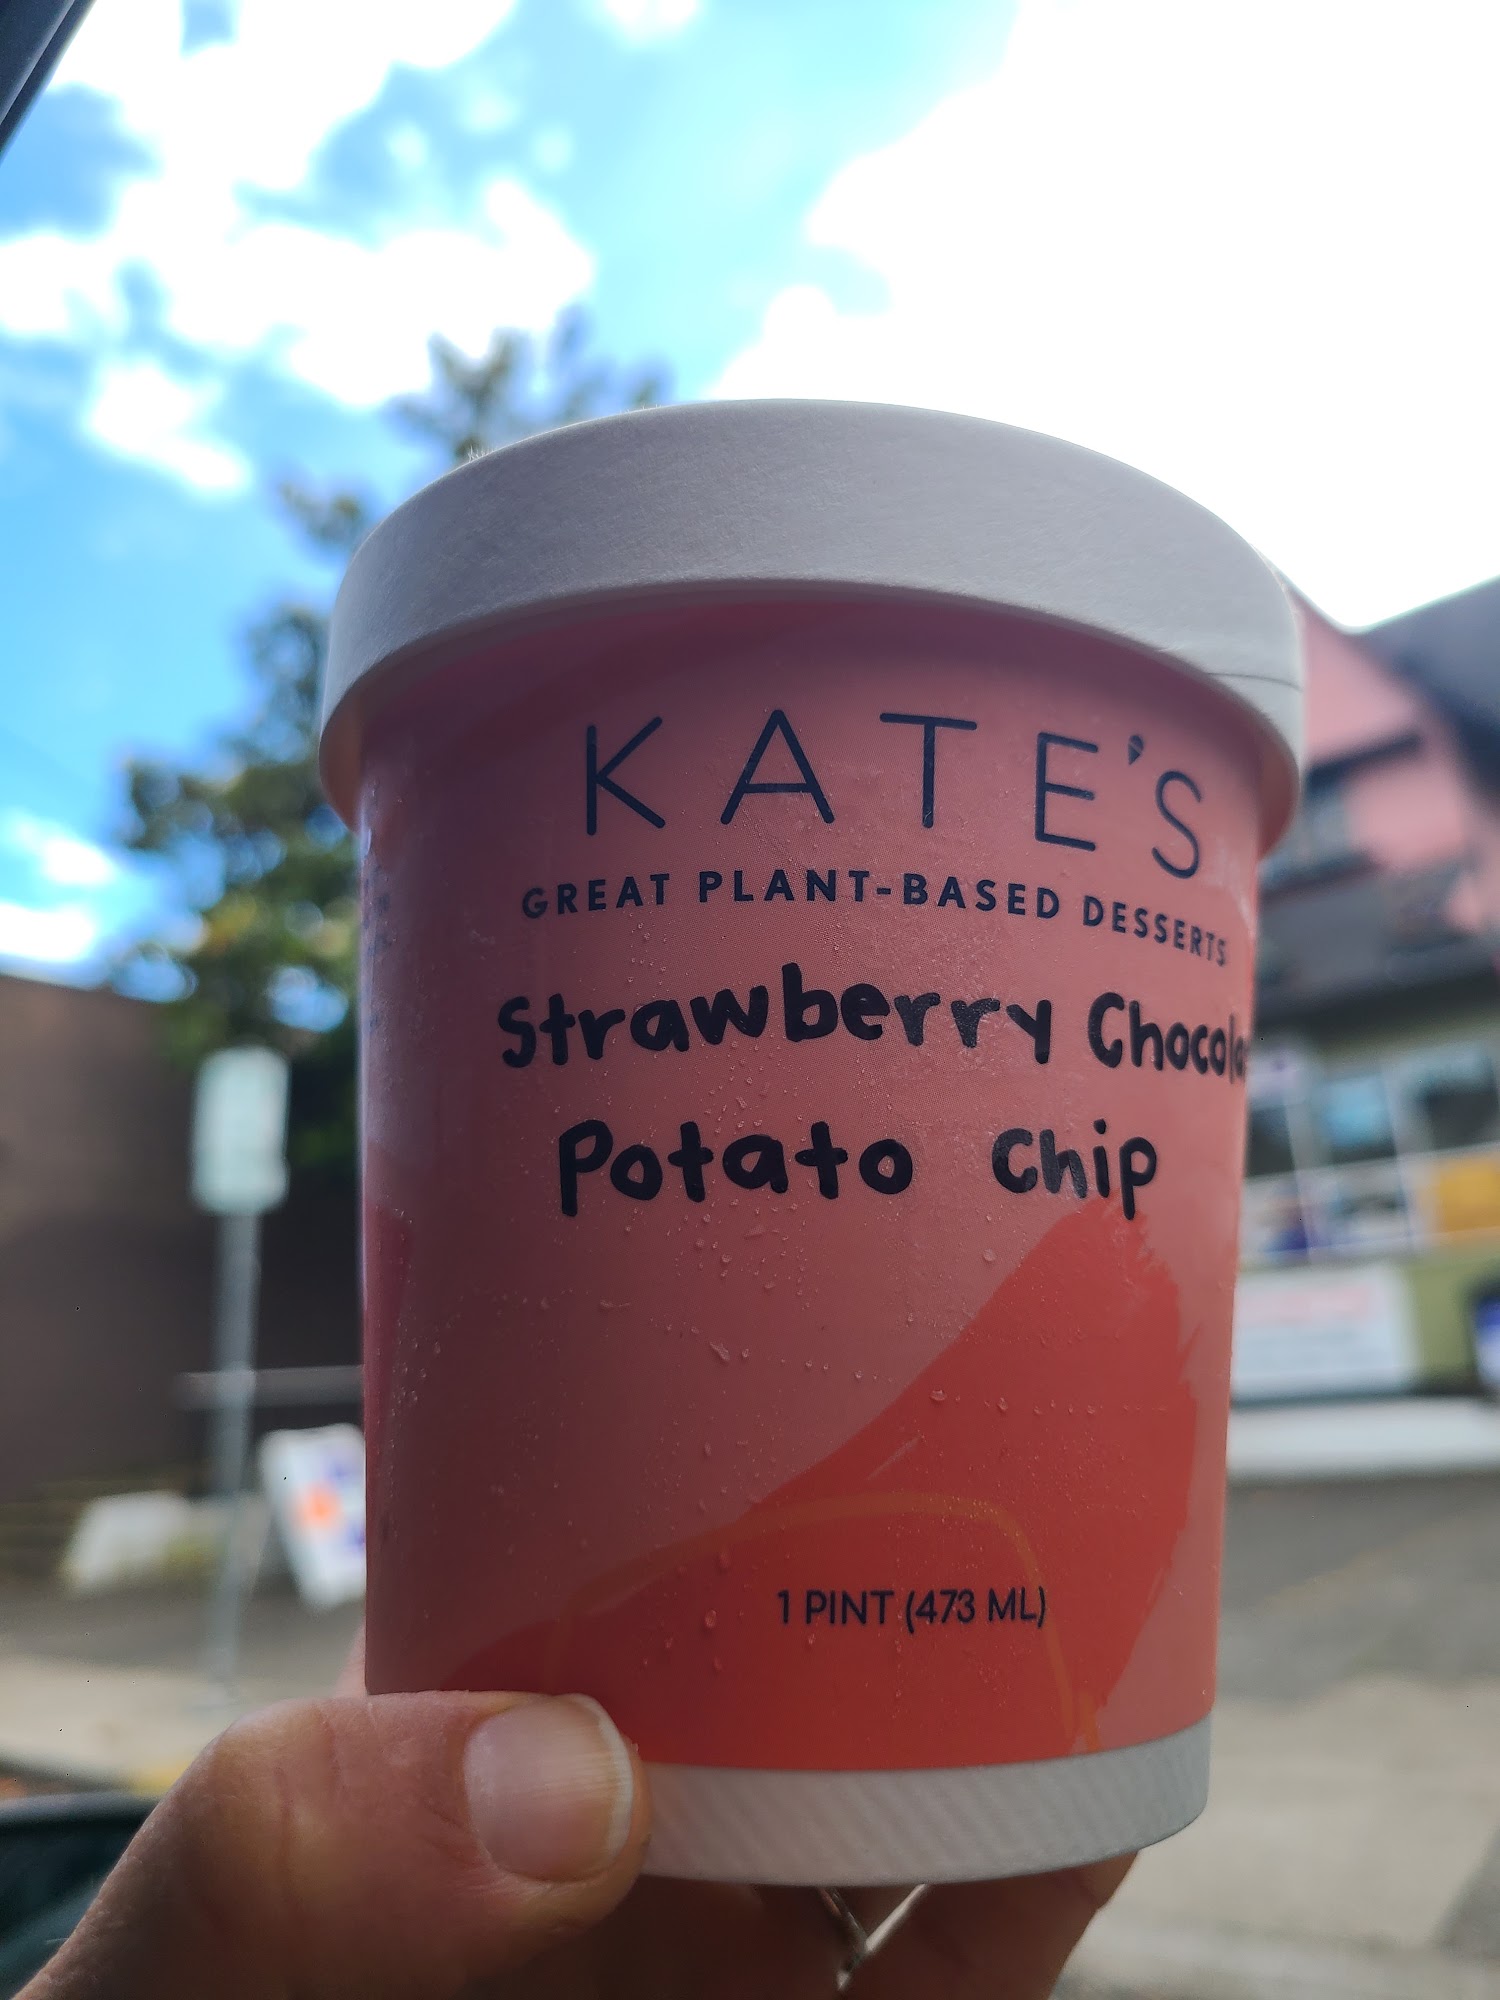 Kate's Ice Cream 1430 NW 23rd Ave, Portland, OR 97210